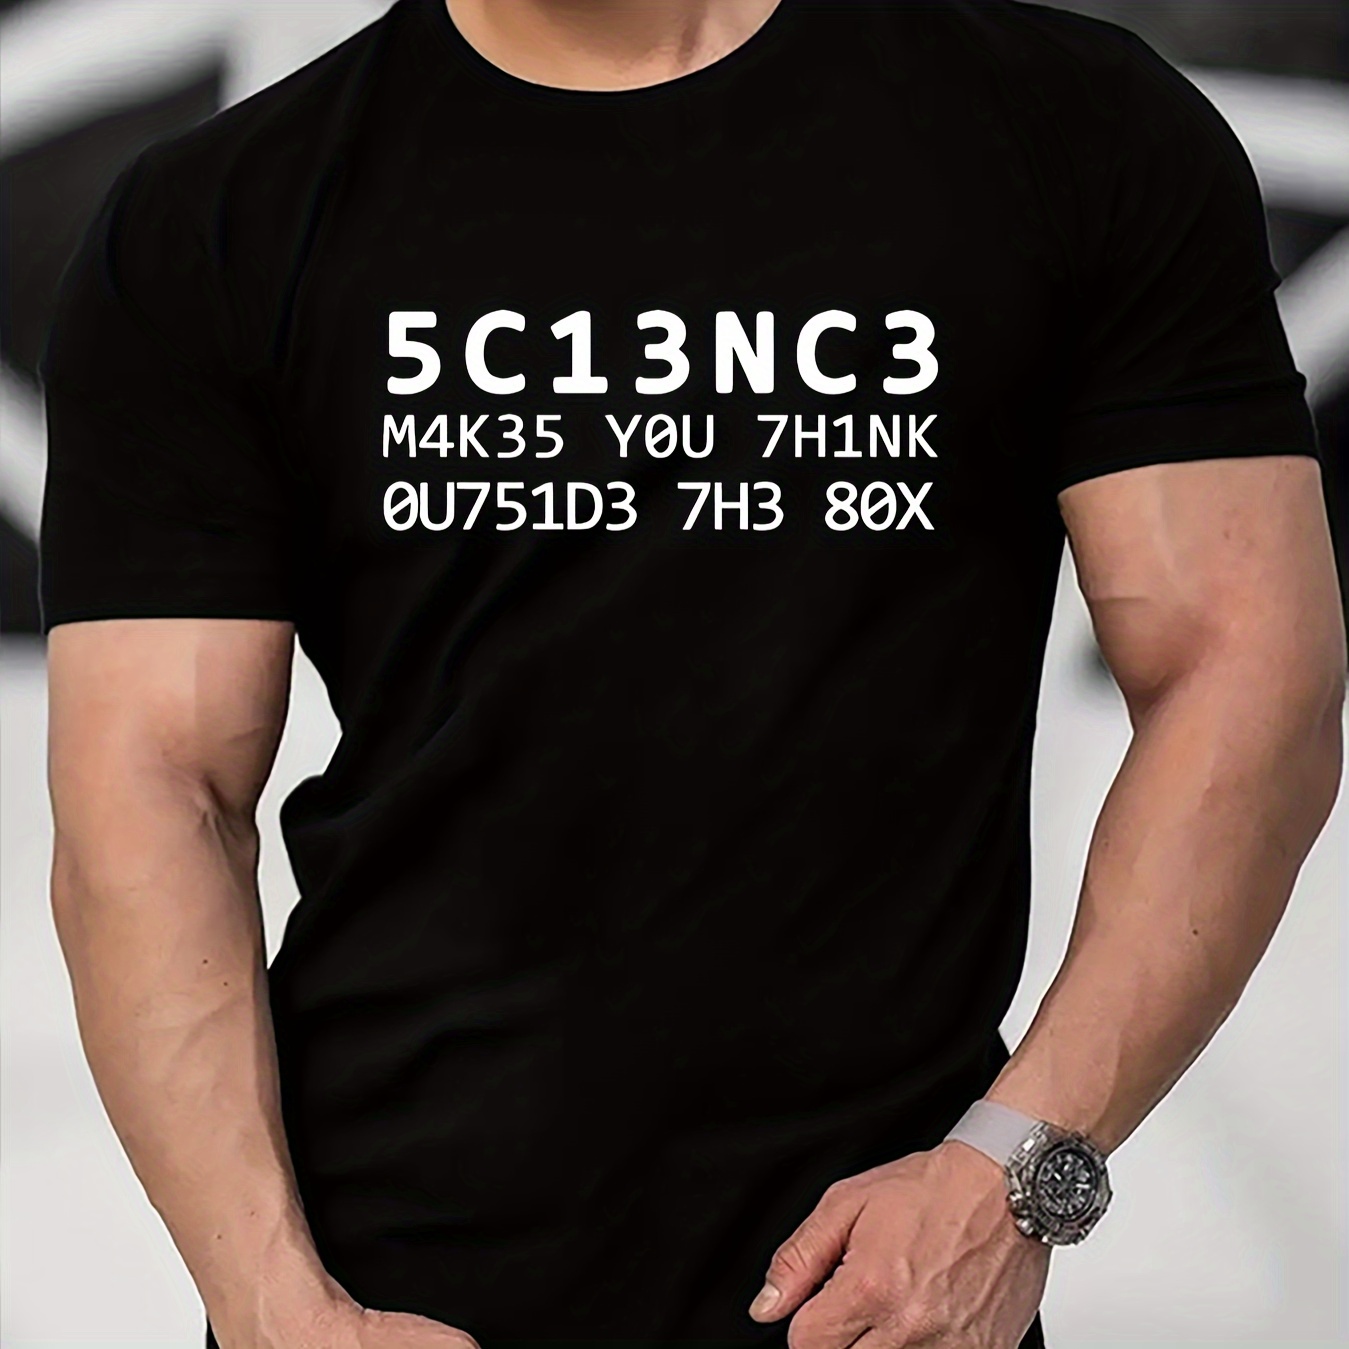 

Science Makes You Think 5c13nc3 Funny Humor Pun T-shirt For Men, Quick-drying Comfy Casual Summer T-shirt For Daily Wear Work Out And Vacation Resorts